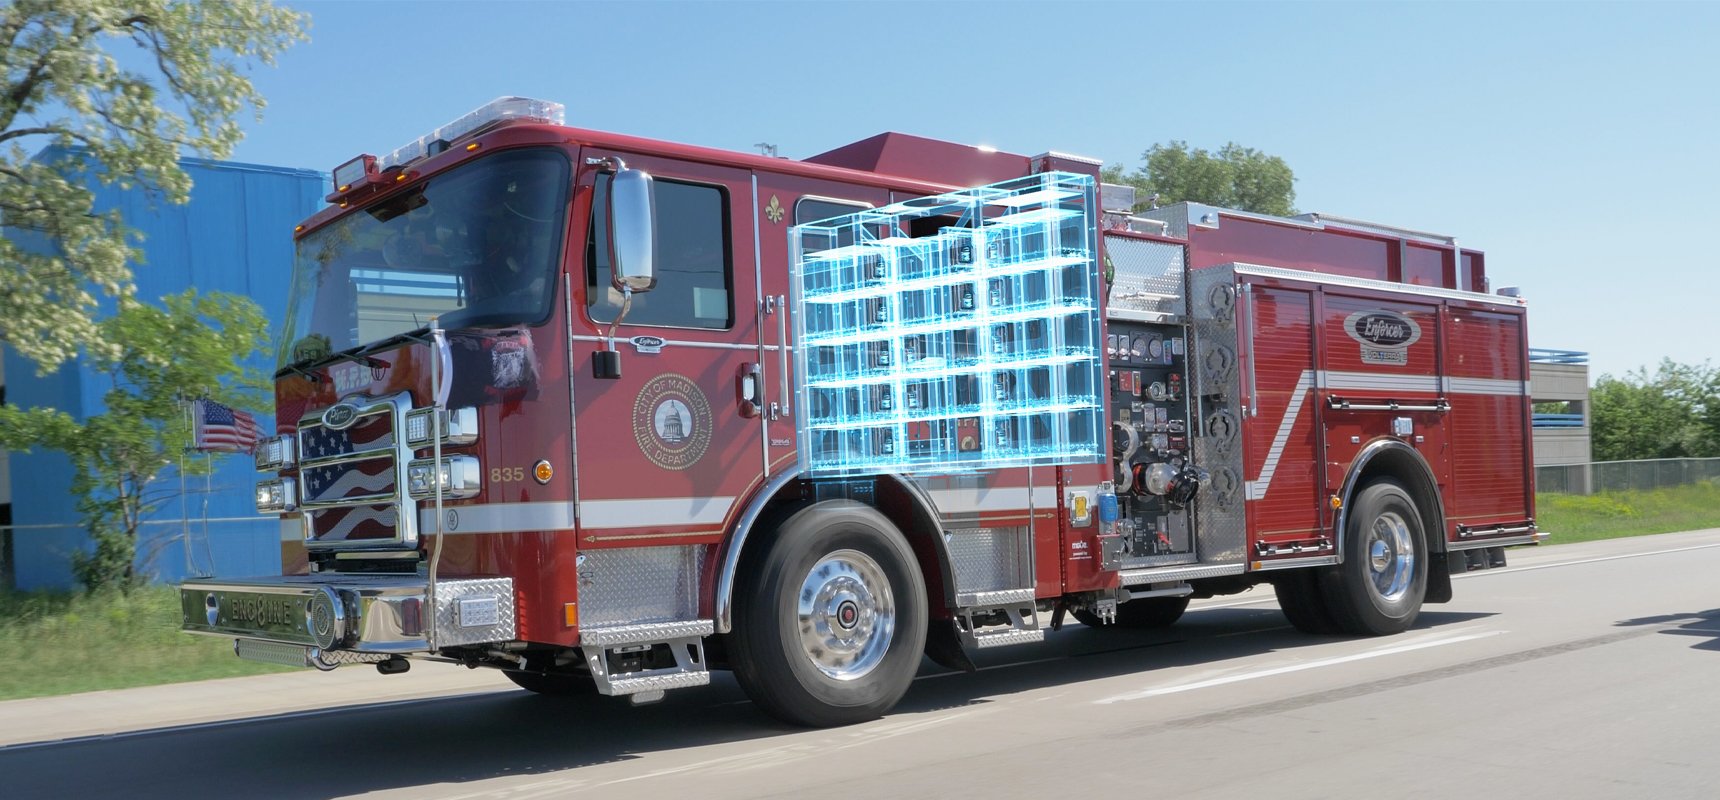 A red electric fire truck drives along a highway with the patented parallel-electric drive train highlighted with a graphic overlay.